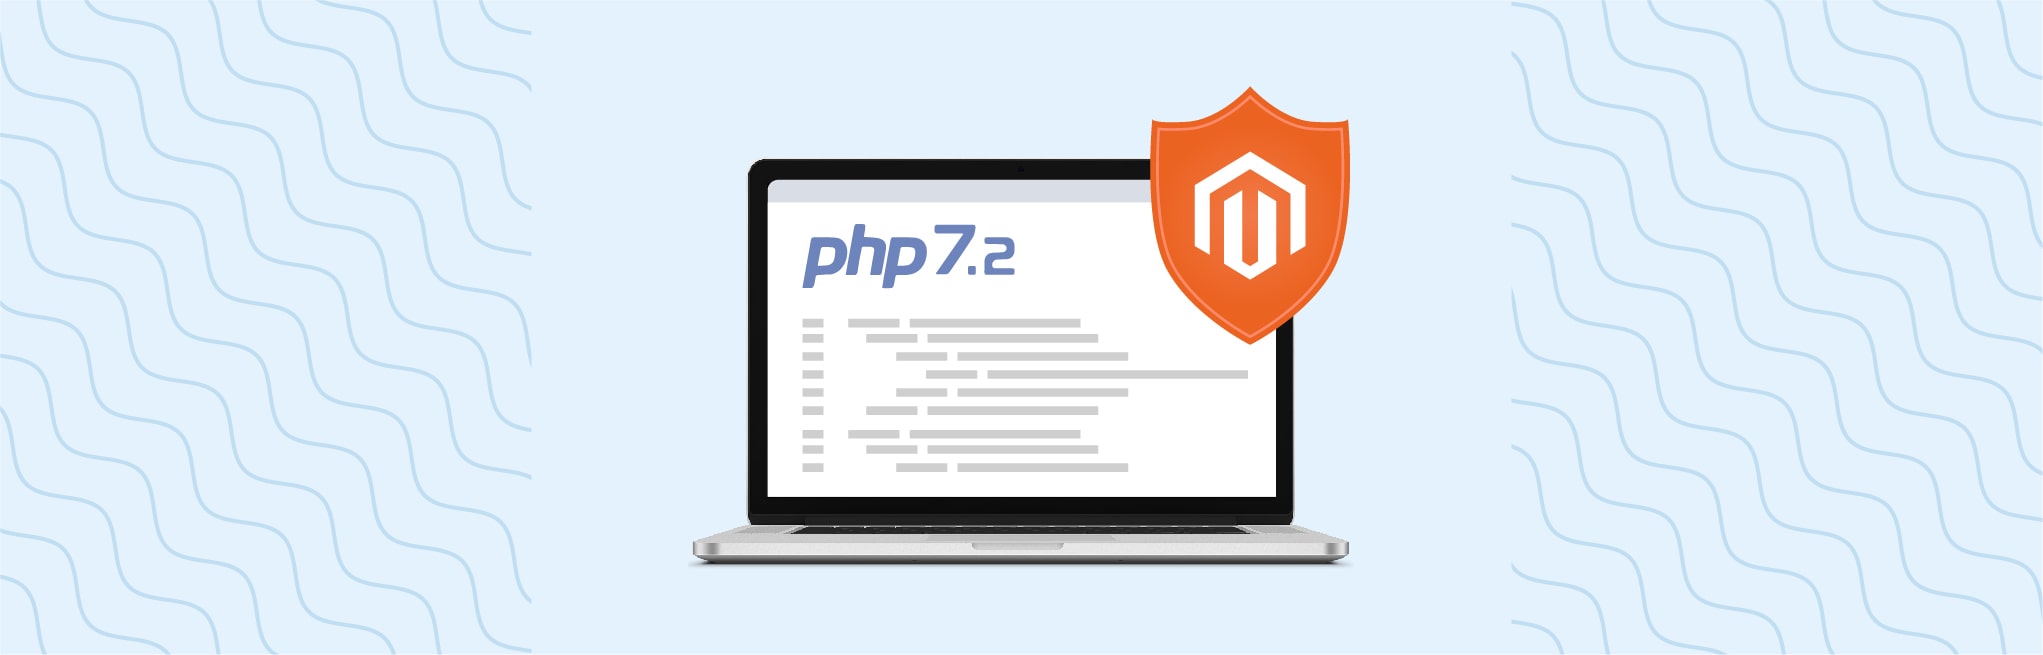 banner-What-are-the-main-benefits-of-the-all-new-PHP-7.2-for-Magento-sites